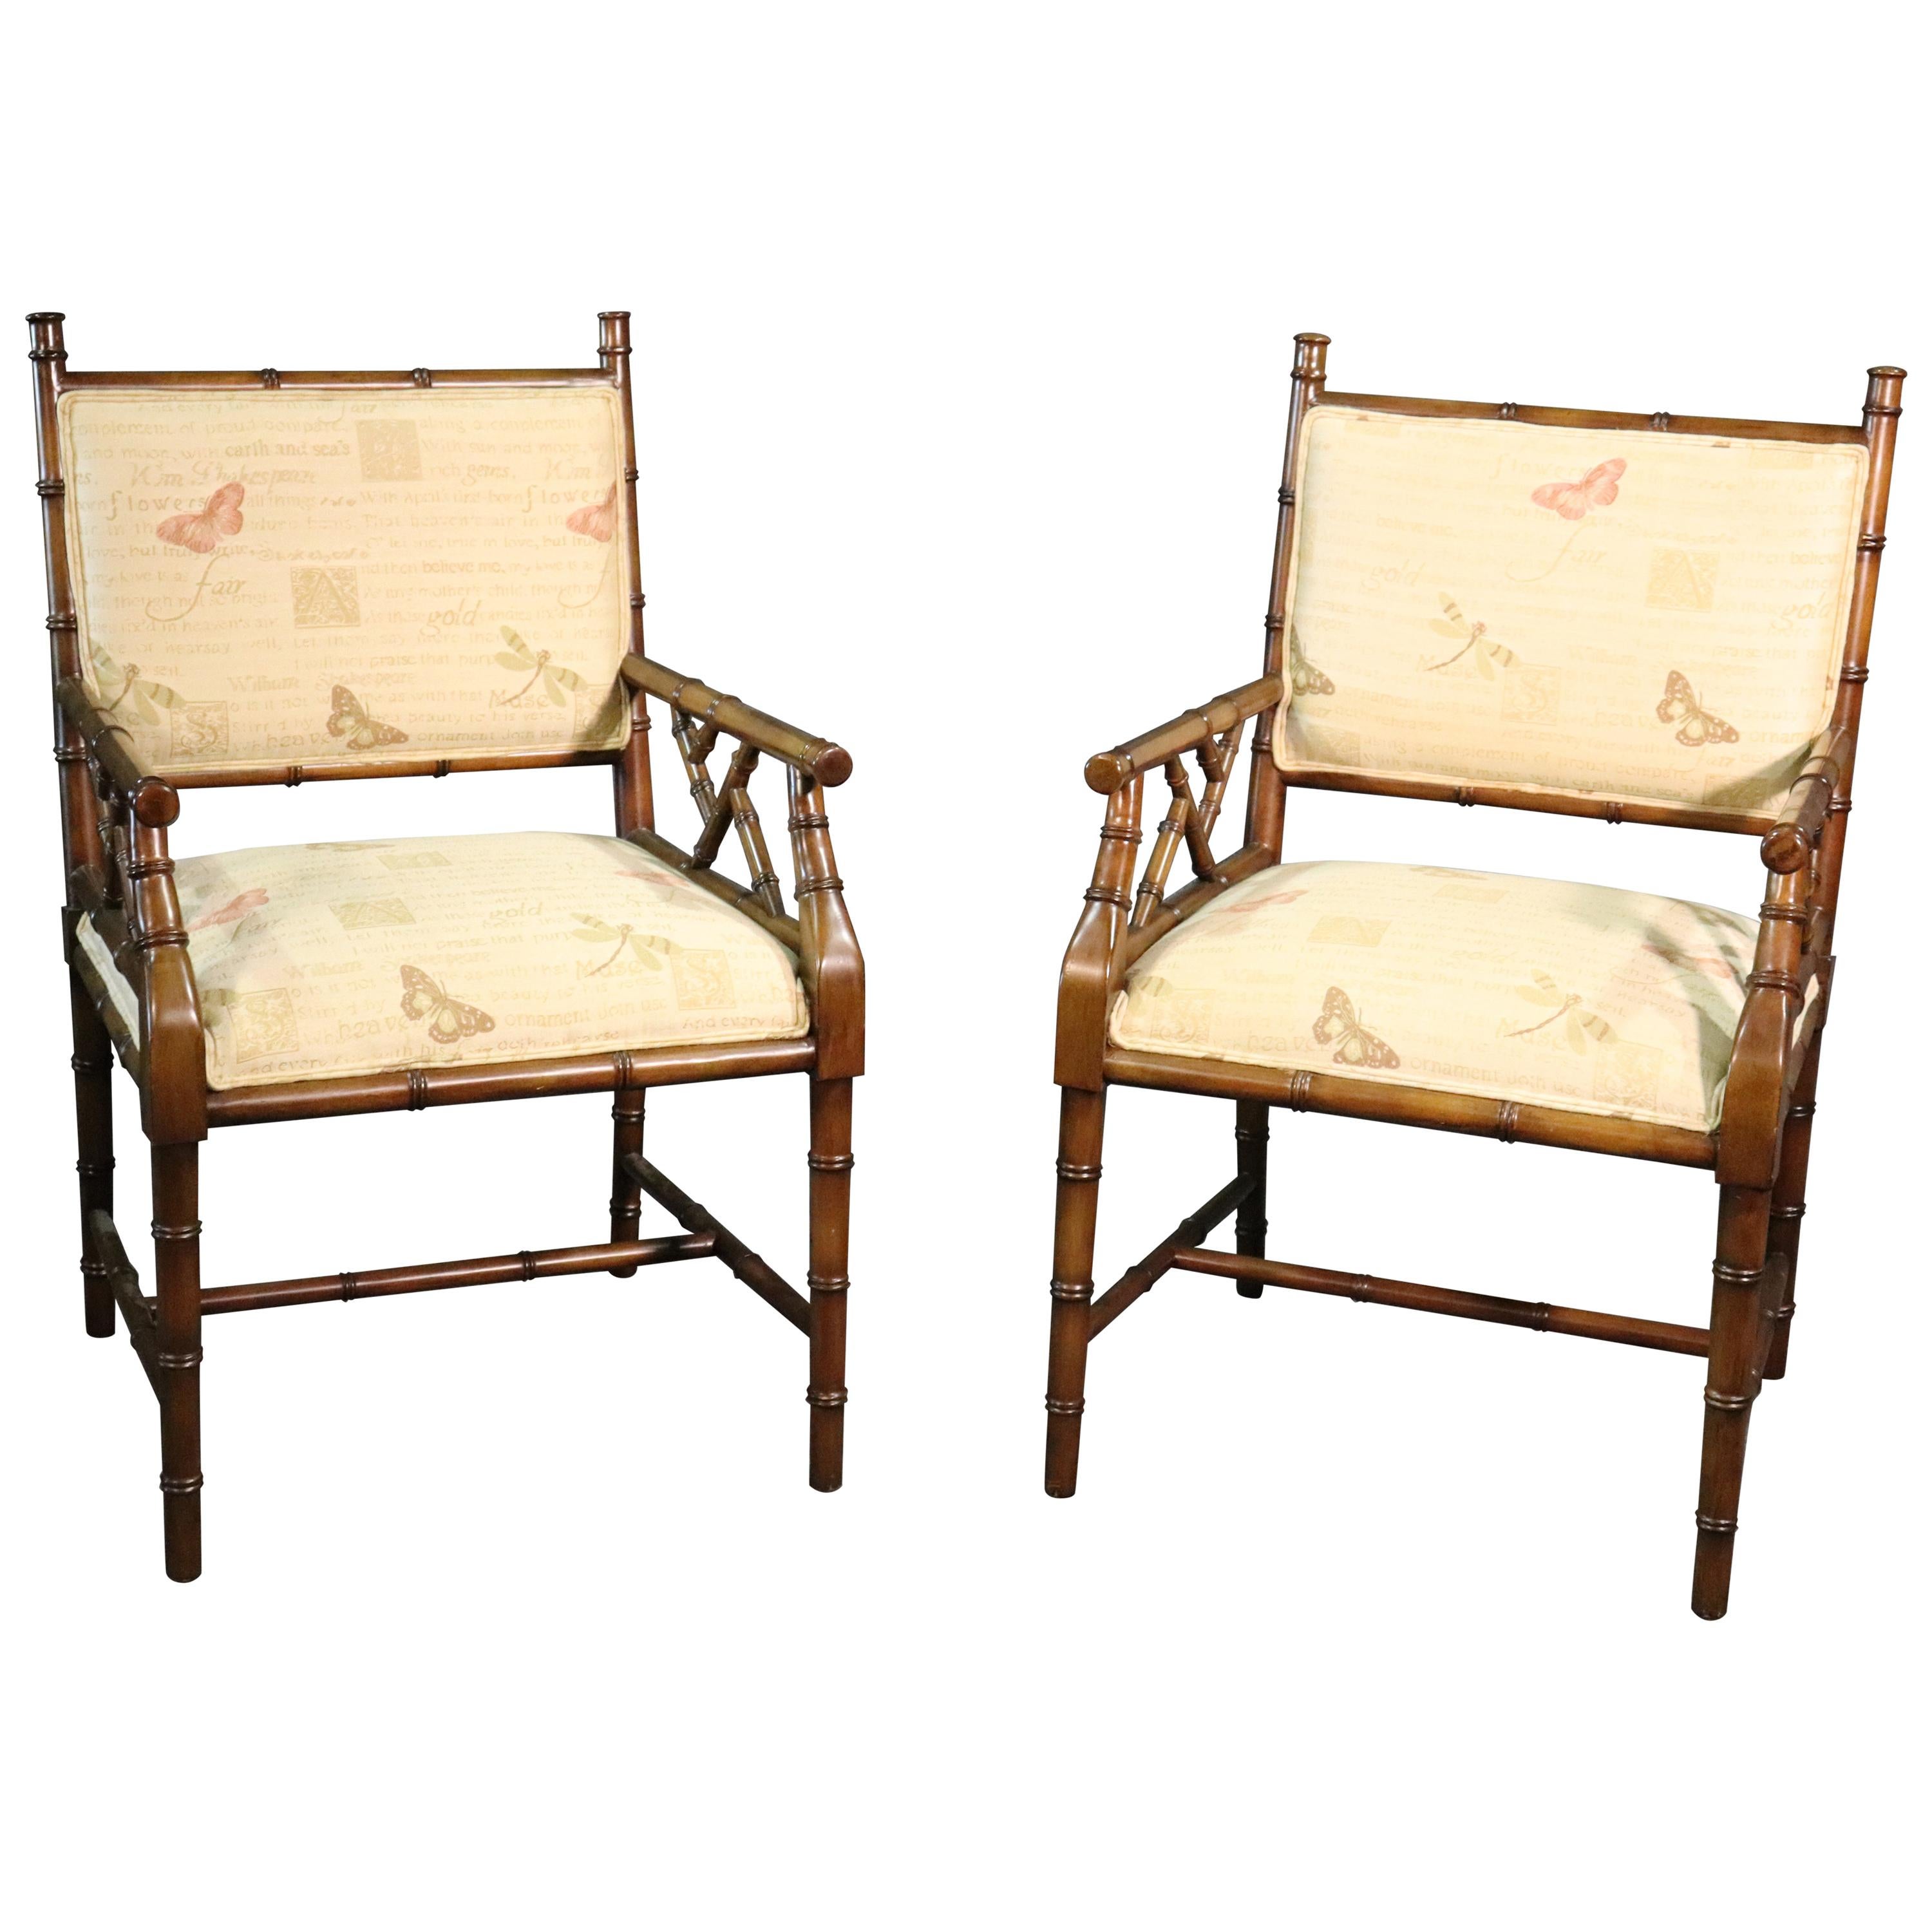 Pair of French Regency Style Faux Bamboo Walnut Armchairs Dining Chairs